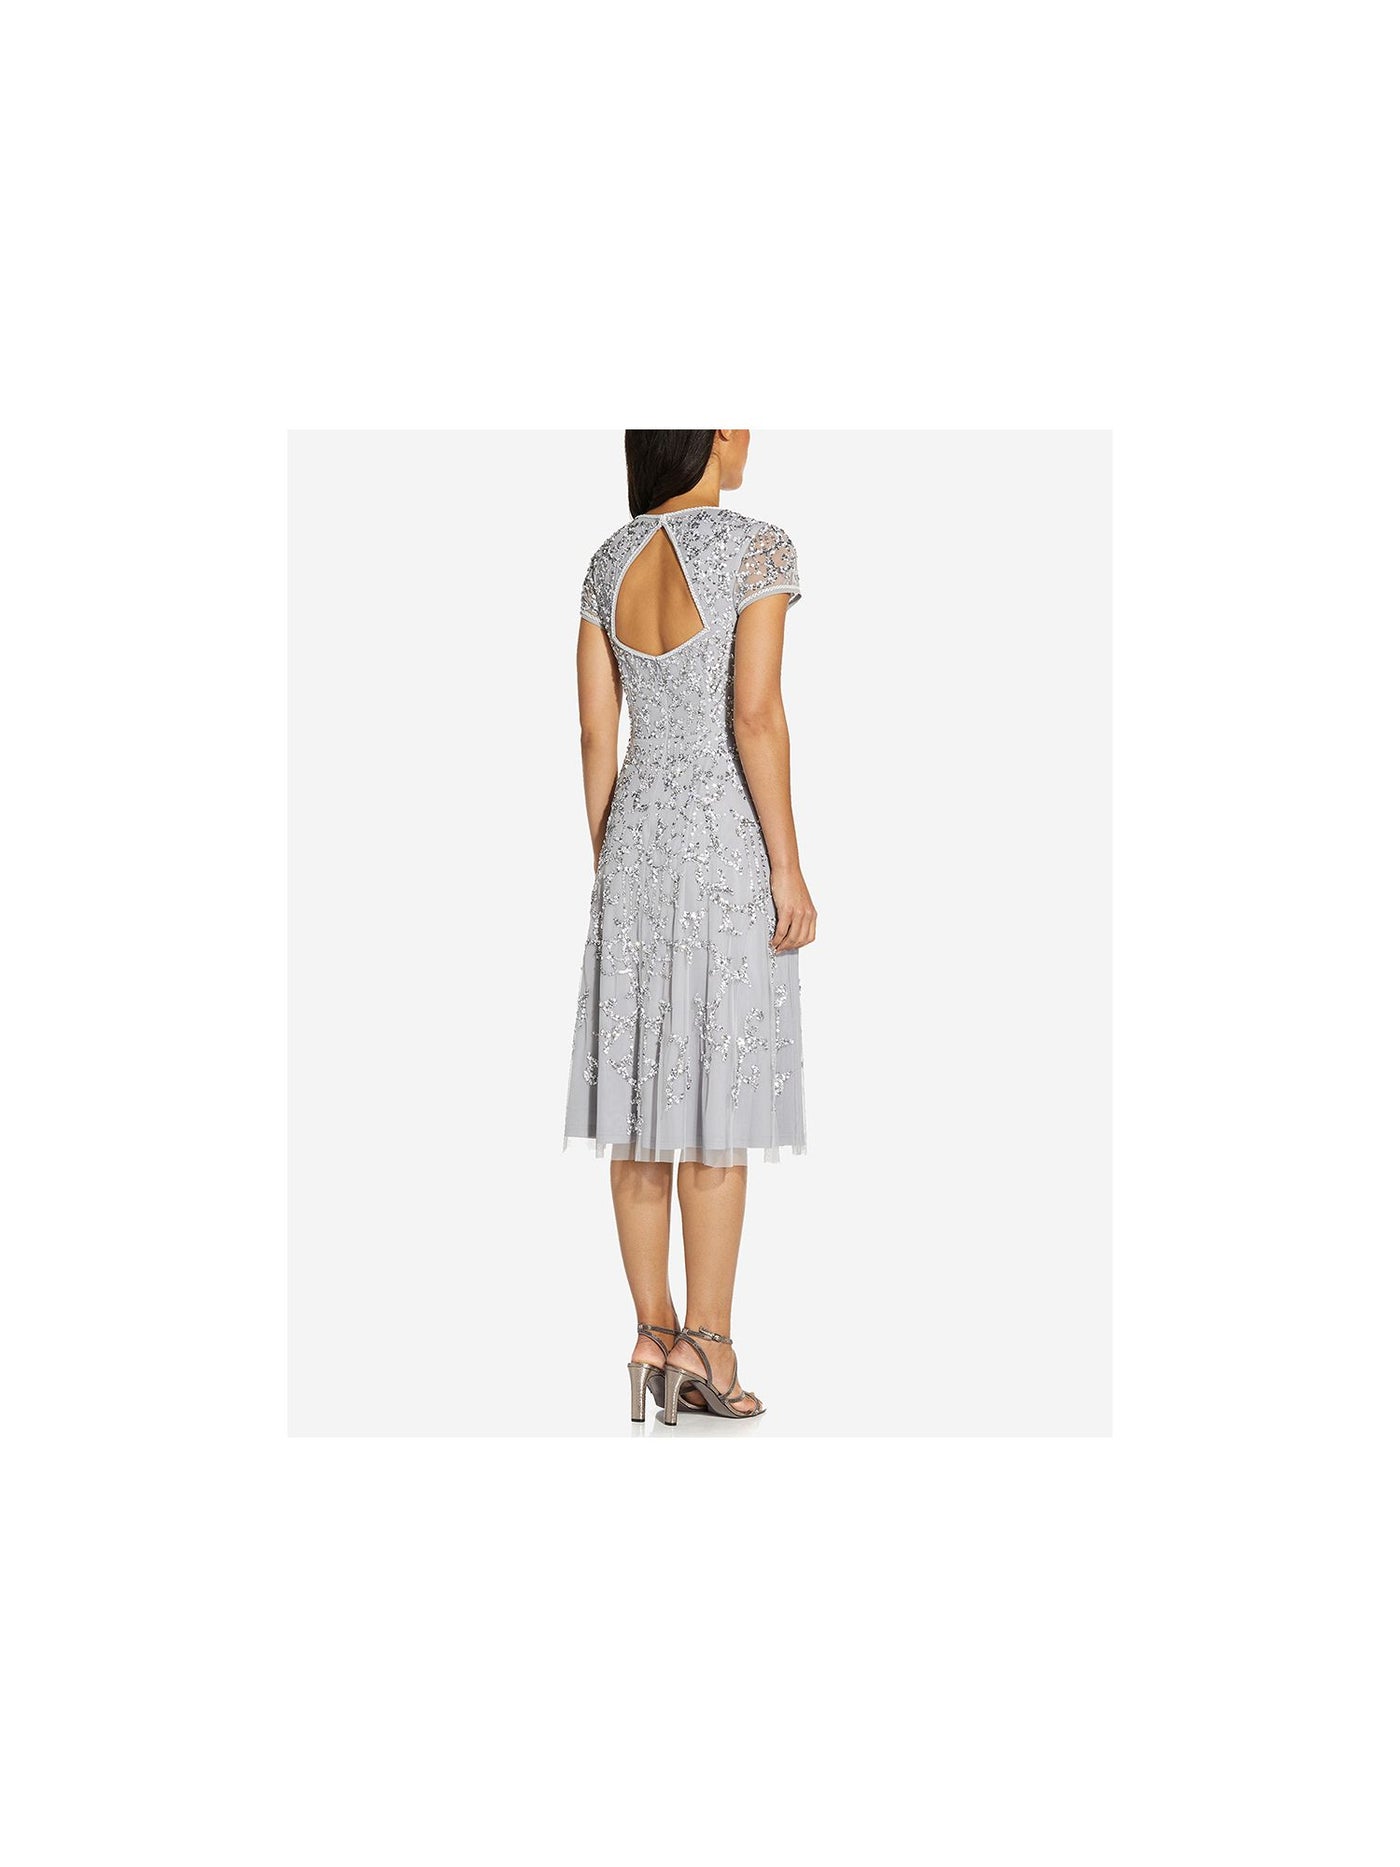 ADRIANNA PAPELL Womens Silver Embellished Zippered Cap Sleeve Queen Anne Neckline Below The Knee Formal Fit + Flare Dress 2